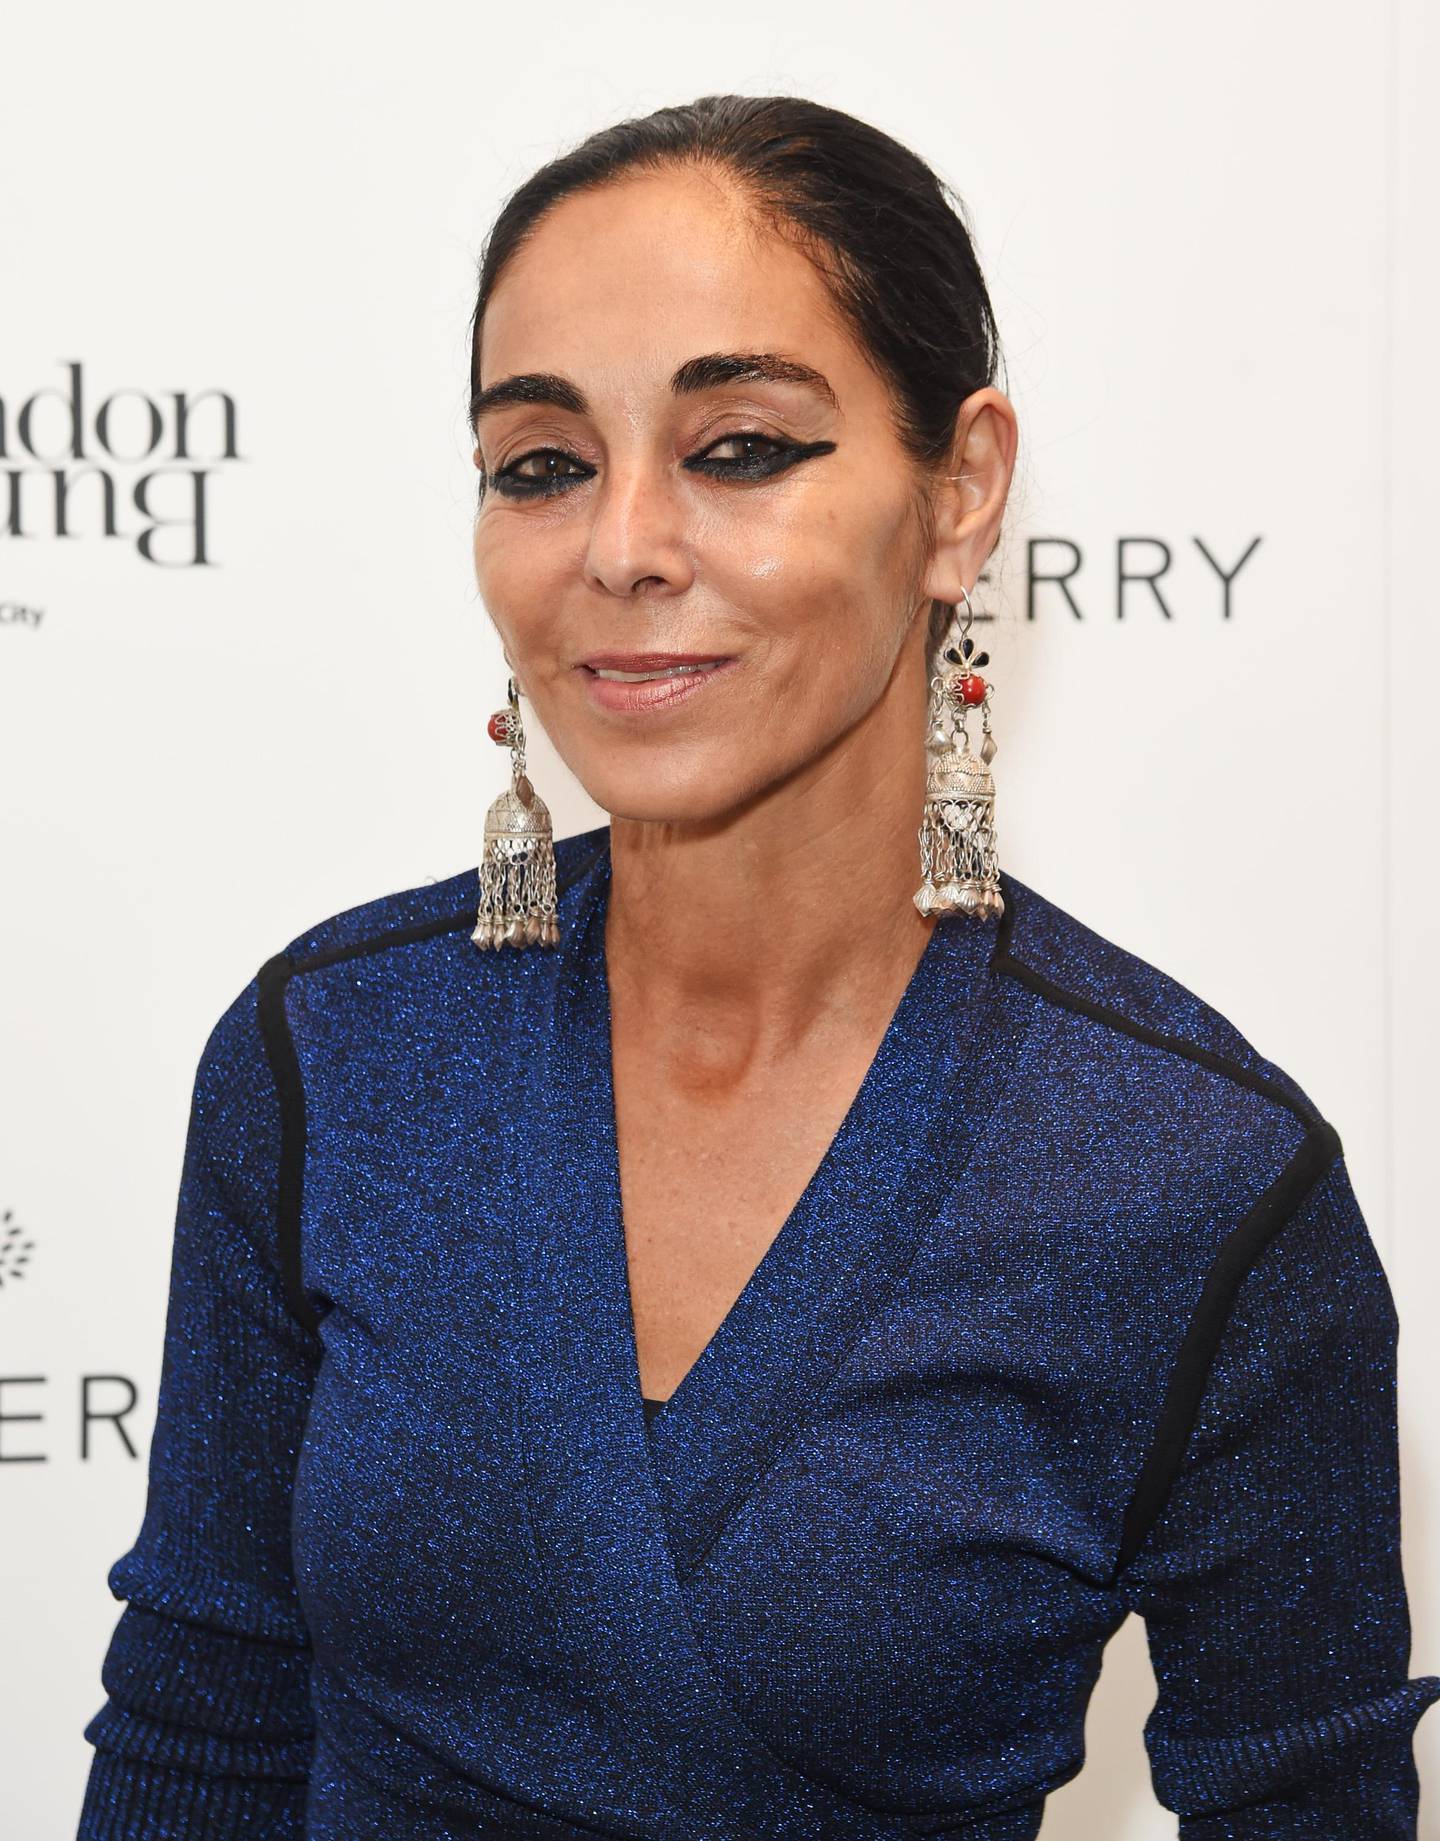 LONDON, ENGLAND - SEPTEMBER 30:  Shirin Neshat attends the London Burning Launch Event at The ICA supported by Mulberry at the ICA on September 30, 2015 in London, England.  (Photo by David M. Benett/Dave Benett/Getty Images for Mulberry)